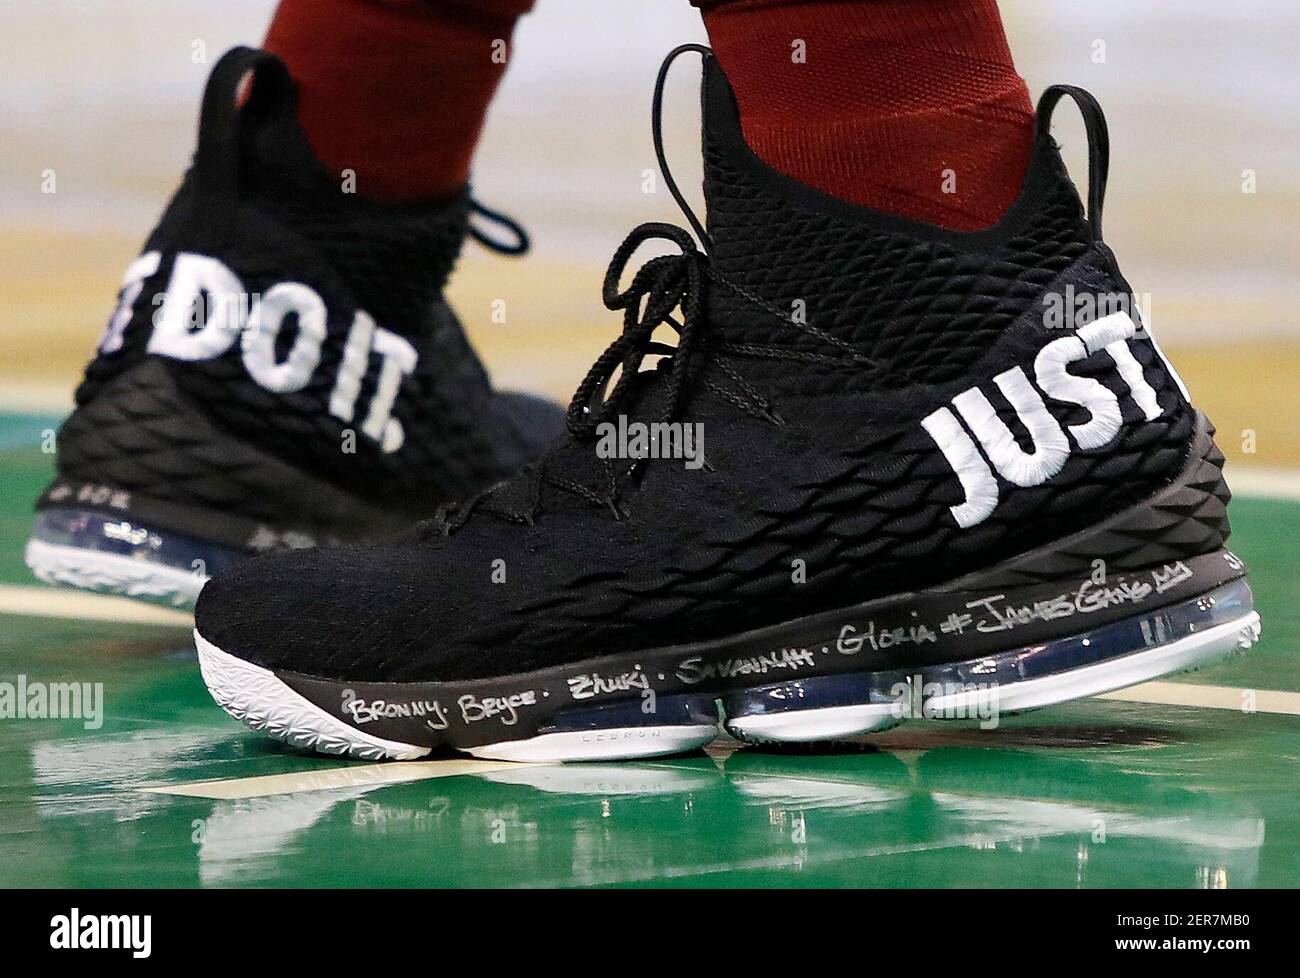 May 13, 2018; Boston, MA, USA; The Nike shoes of Cleveland Cavaliers  forward LeBron James (23) are seen during the first quarter of the Eastern  conference finals of the 2018 NBA Playoffs